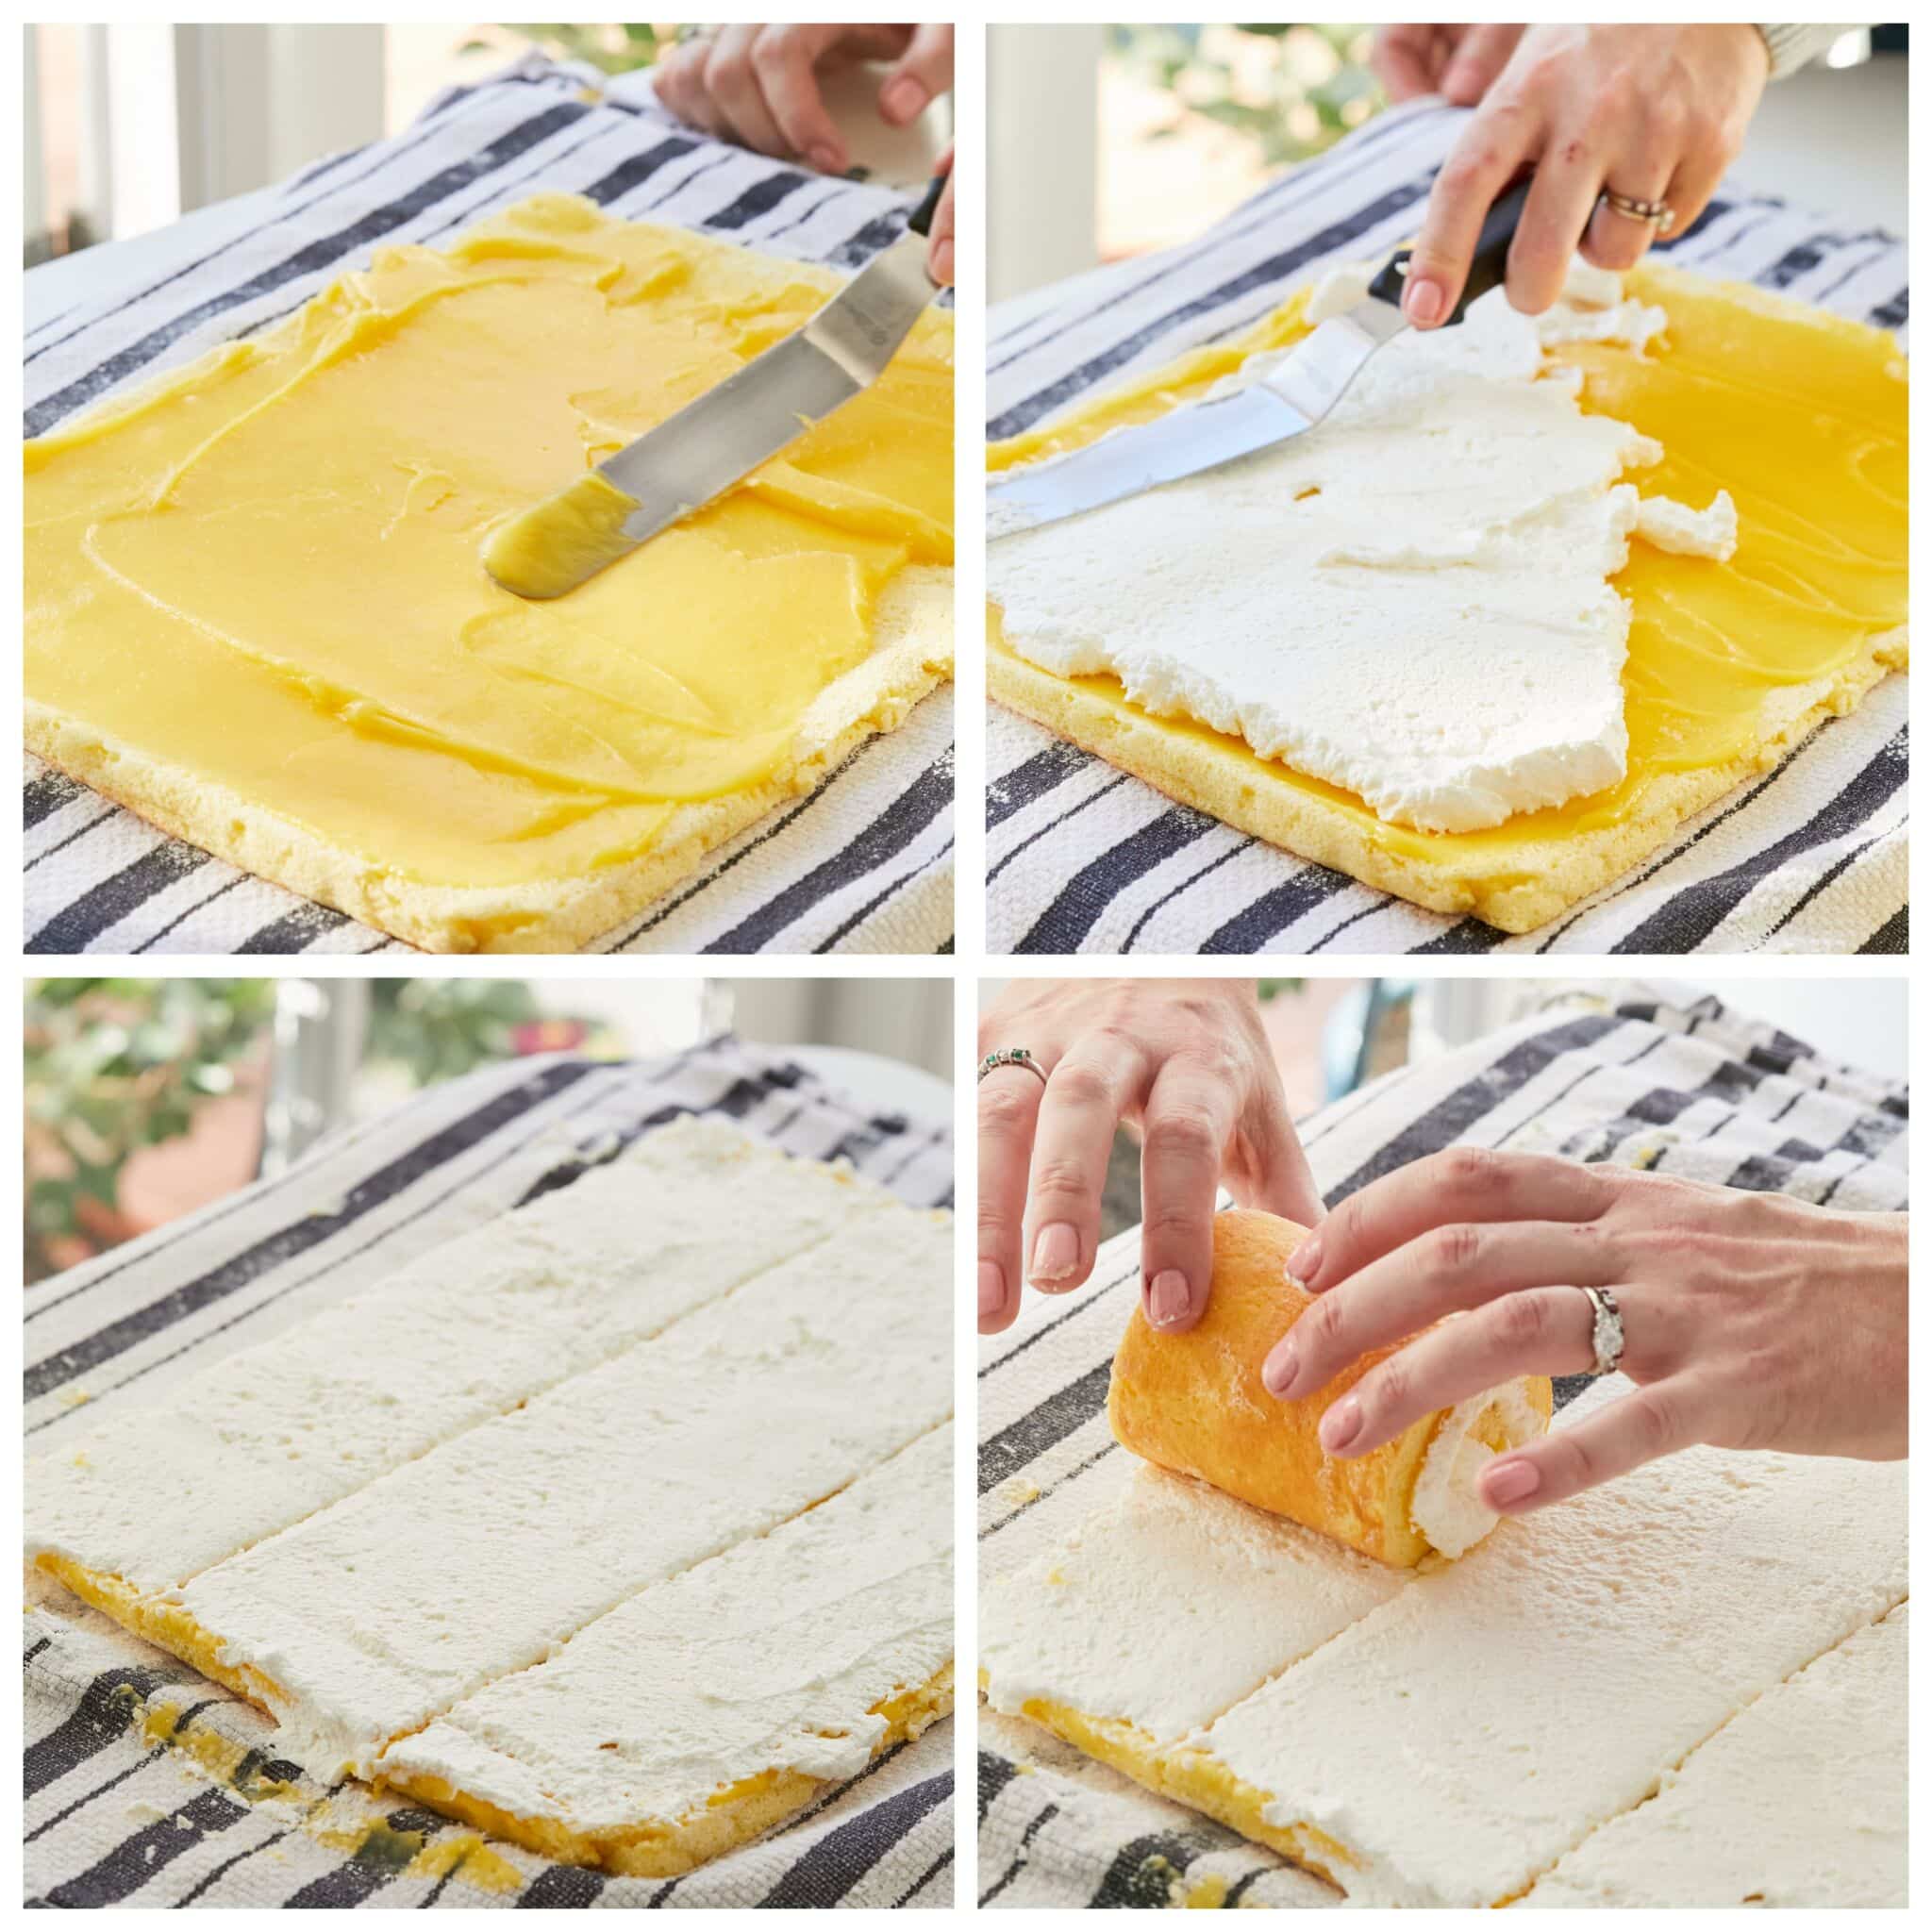 Step-by-step instructions on how to make Vertical Lemon Cake: on the baked sheet cake, spread lemon curd, then cover it with mascarpone whipped cream. Divide the sheet cake into three strips, roll up one from the short side. 